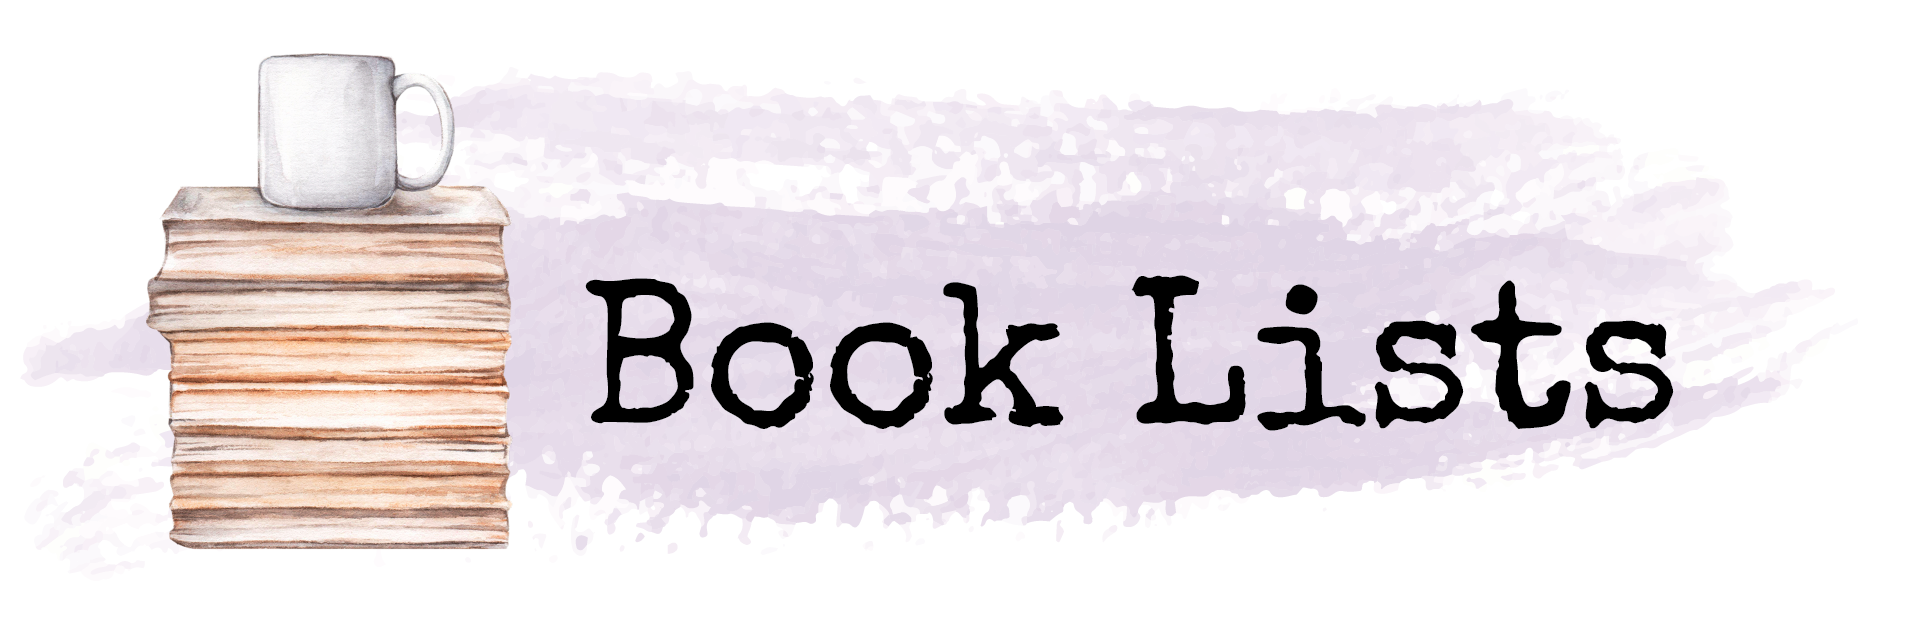 Your Bookish Life - Book Lists